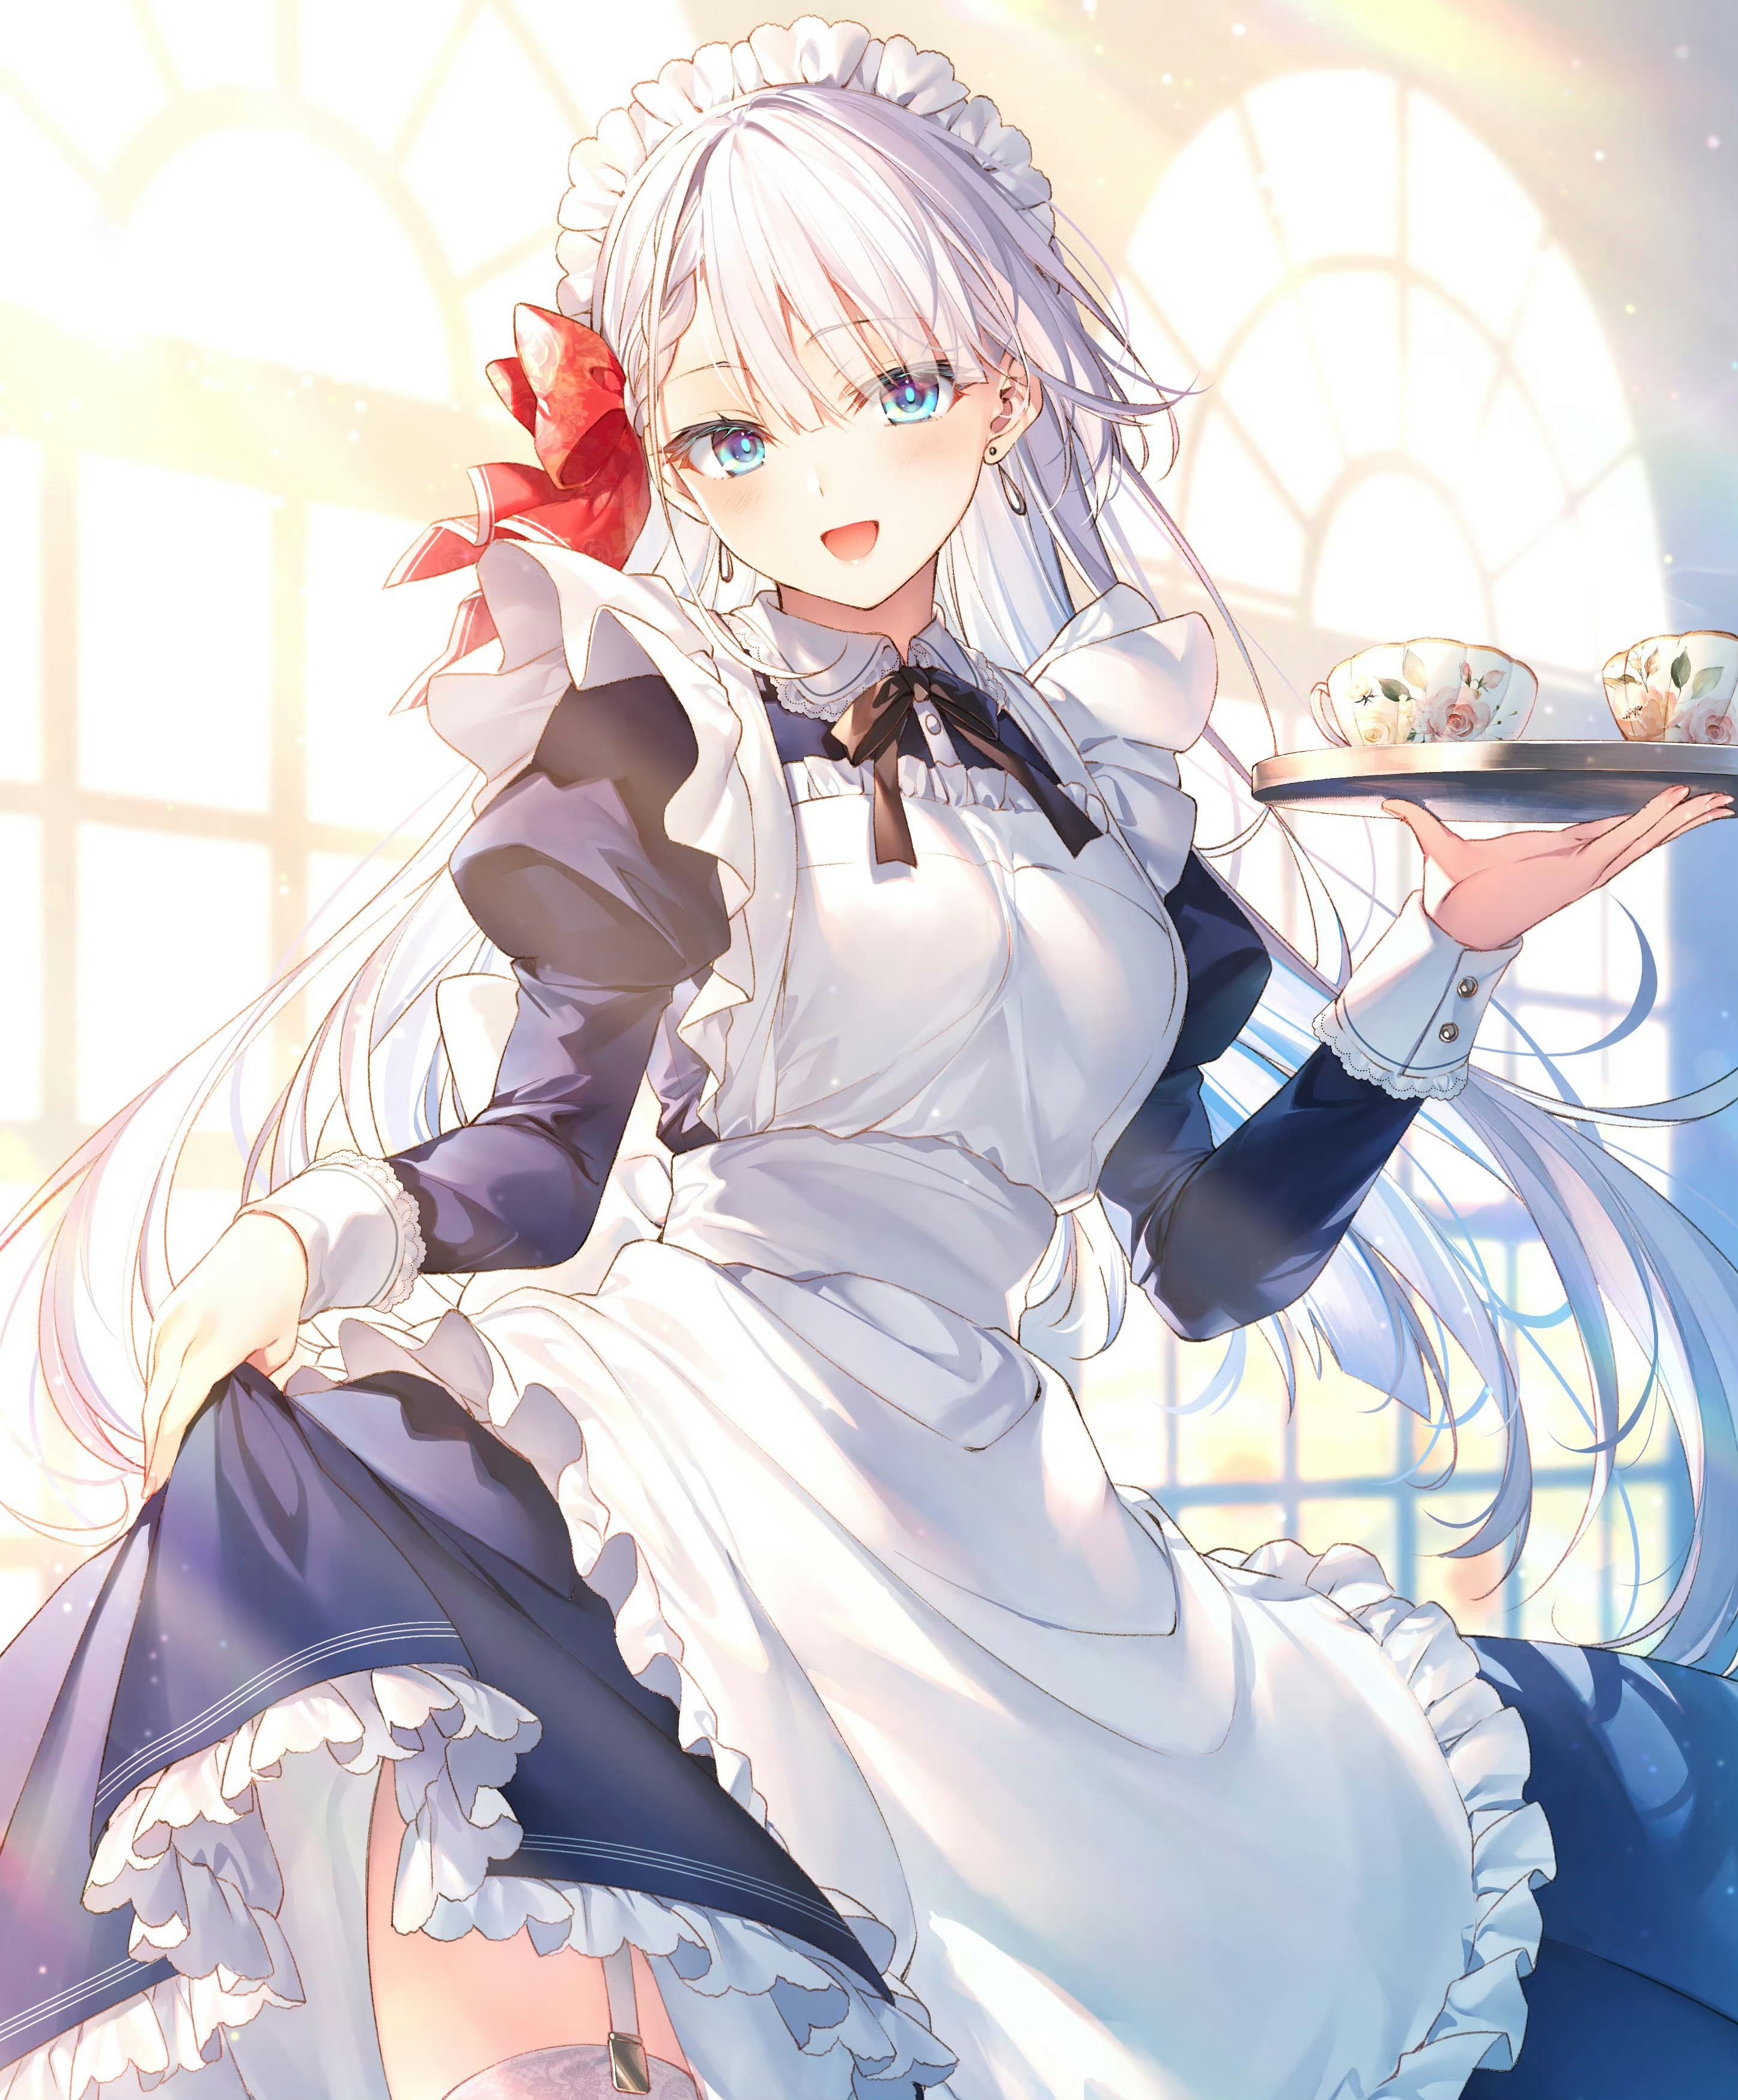 Anime 2893x3495 anime girls anime blue eyes white hair Seiken Gakuin No Maken Tsukai tea women women indoors indoors long hair Lyseria Christaria blushing earring garter straps lifting dress portrait display maid cup looking at viewer maid outfit sunlight blue dress window stockings servants open mouth frills red ribbon tray